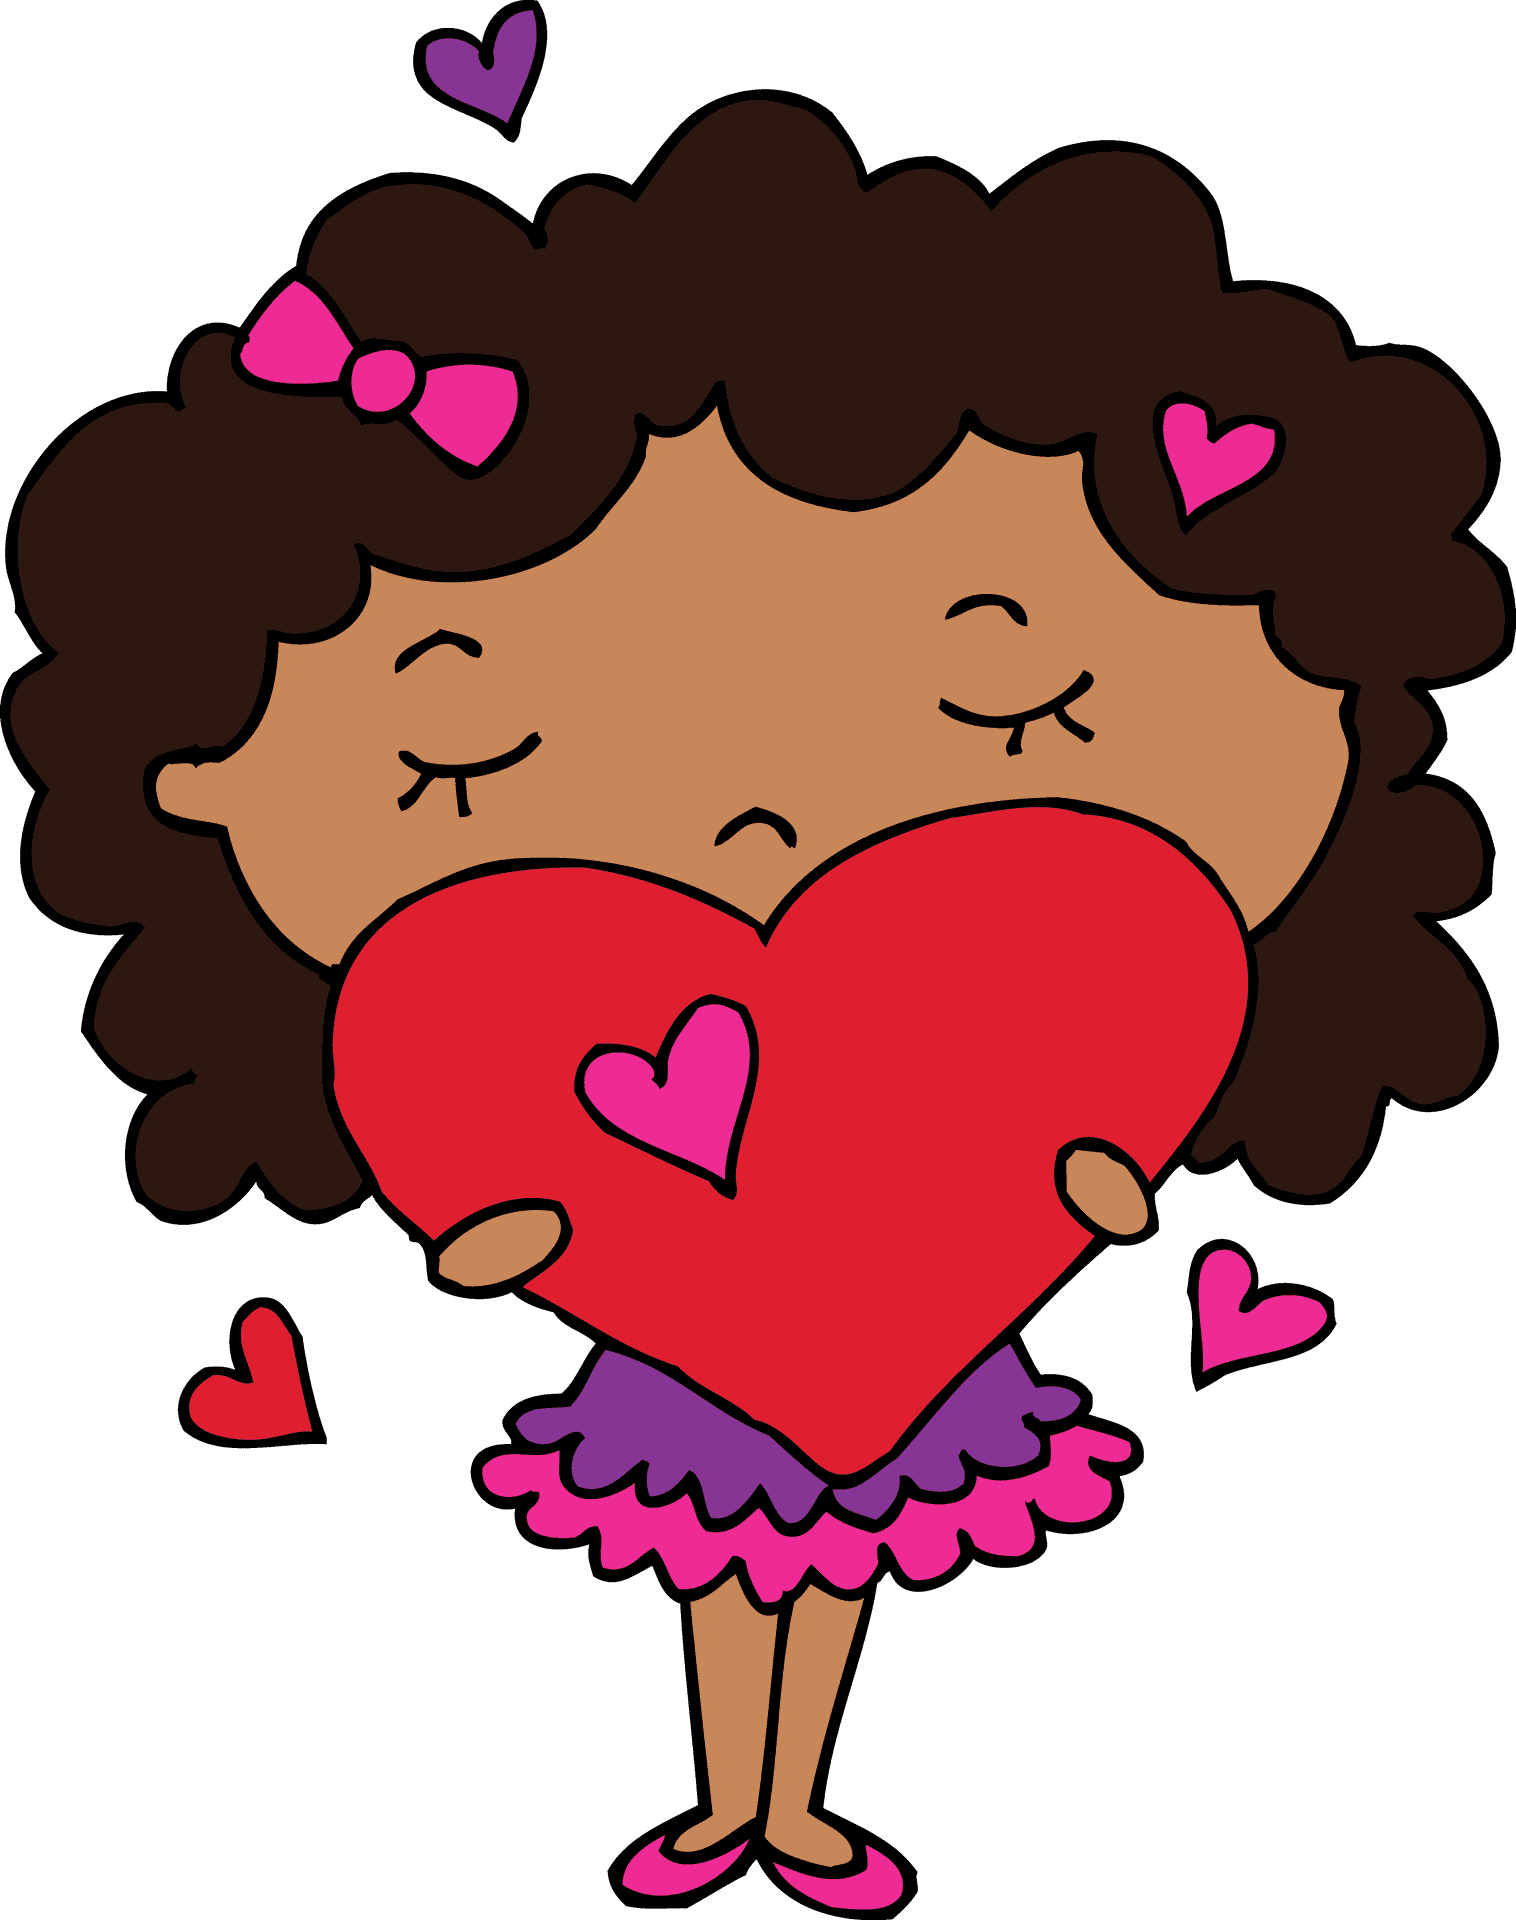 Curly Haired Cartoon Girl Holding Heart PNG